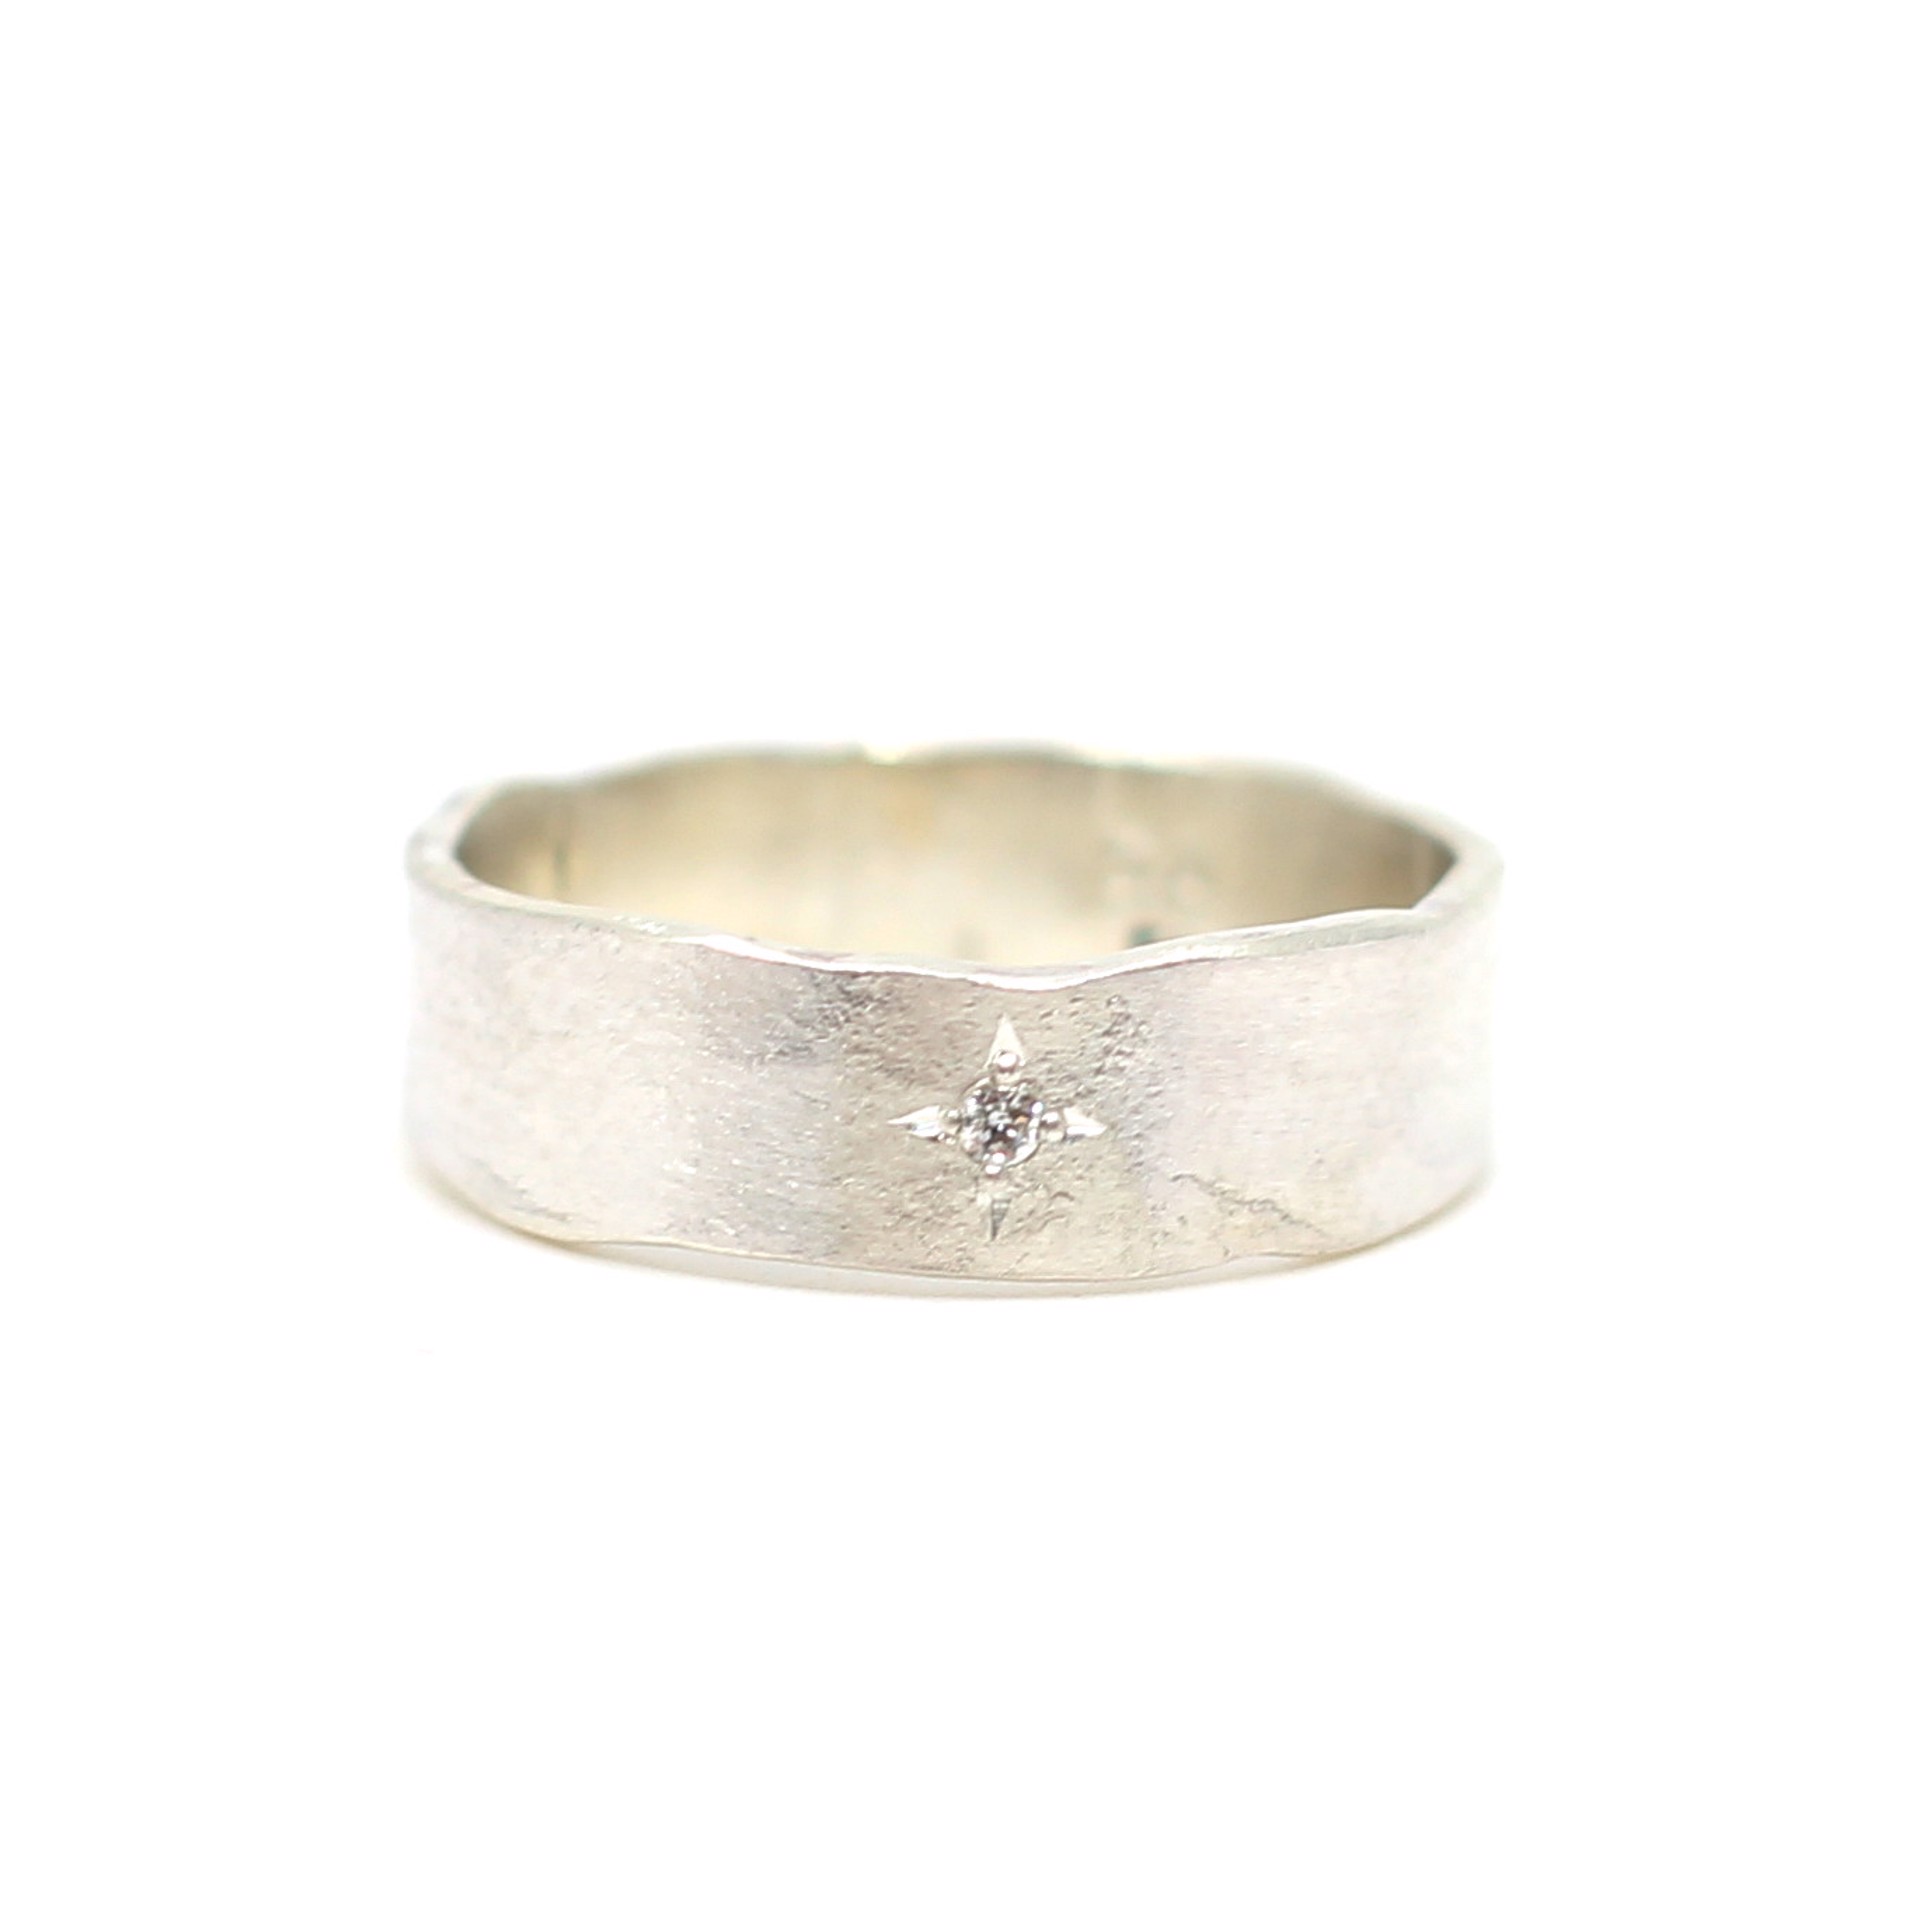 Single Star Ring (Size 8) by Leia Zumbro